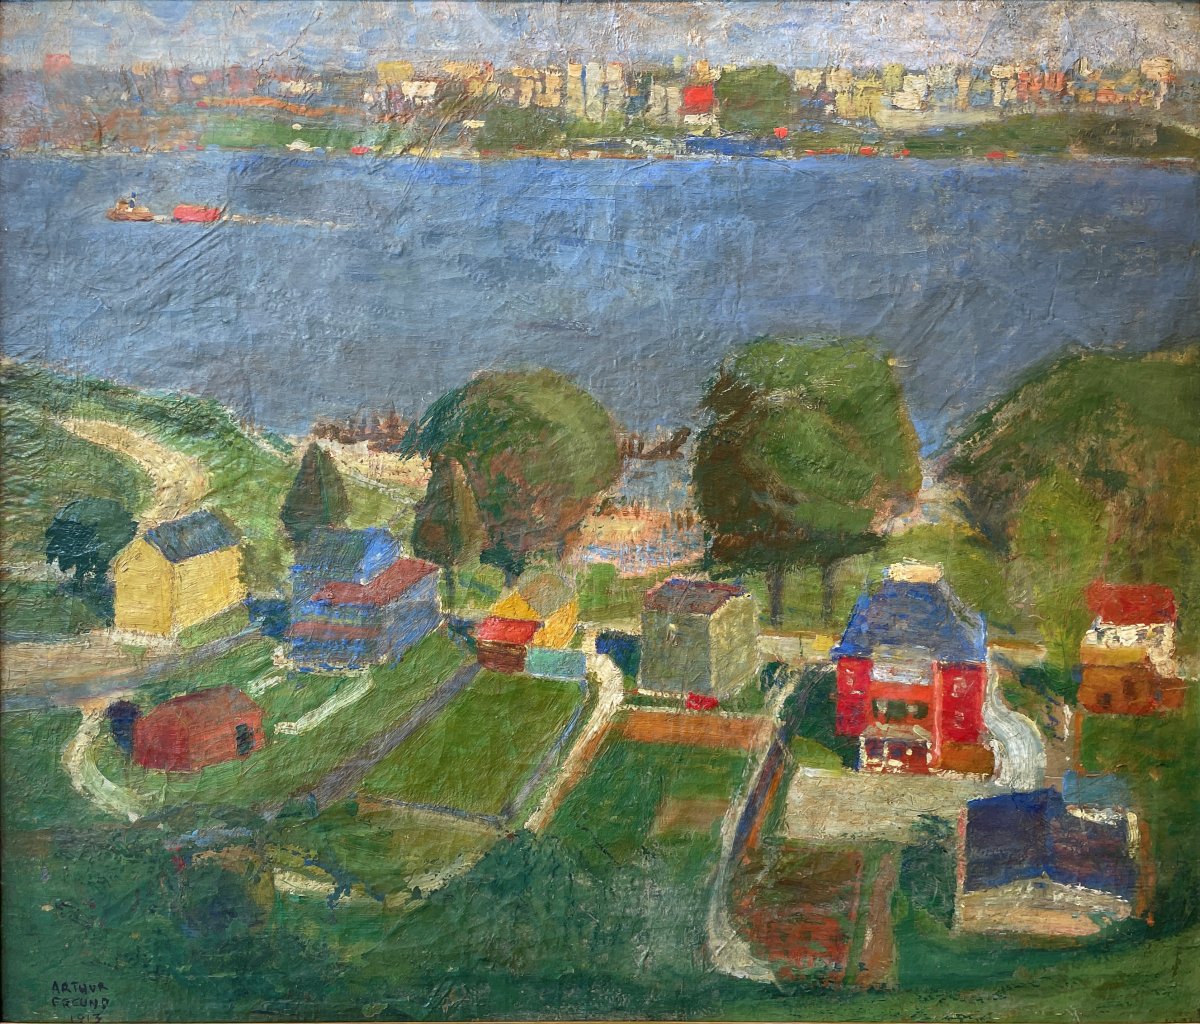 Arthur Freund, View of the City Across the River, 1913 